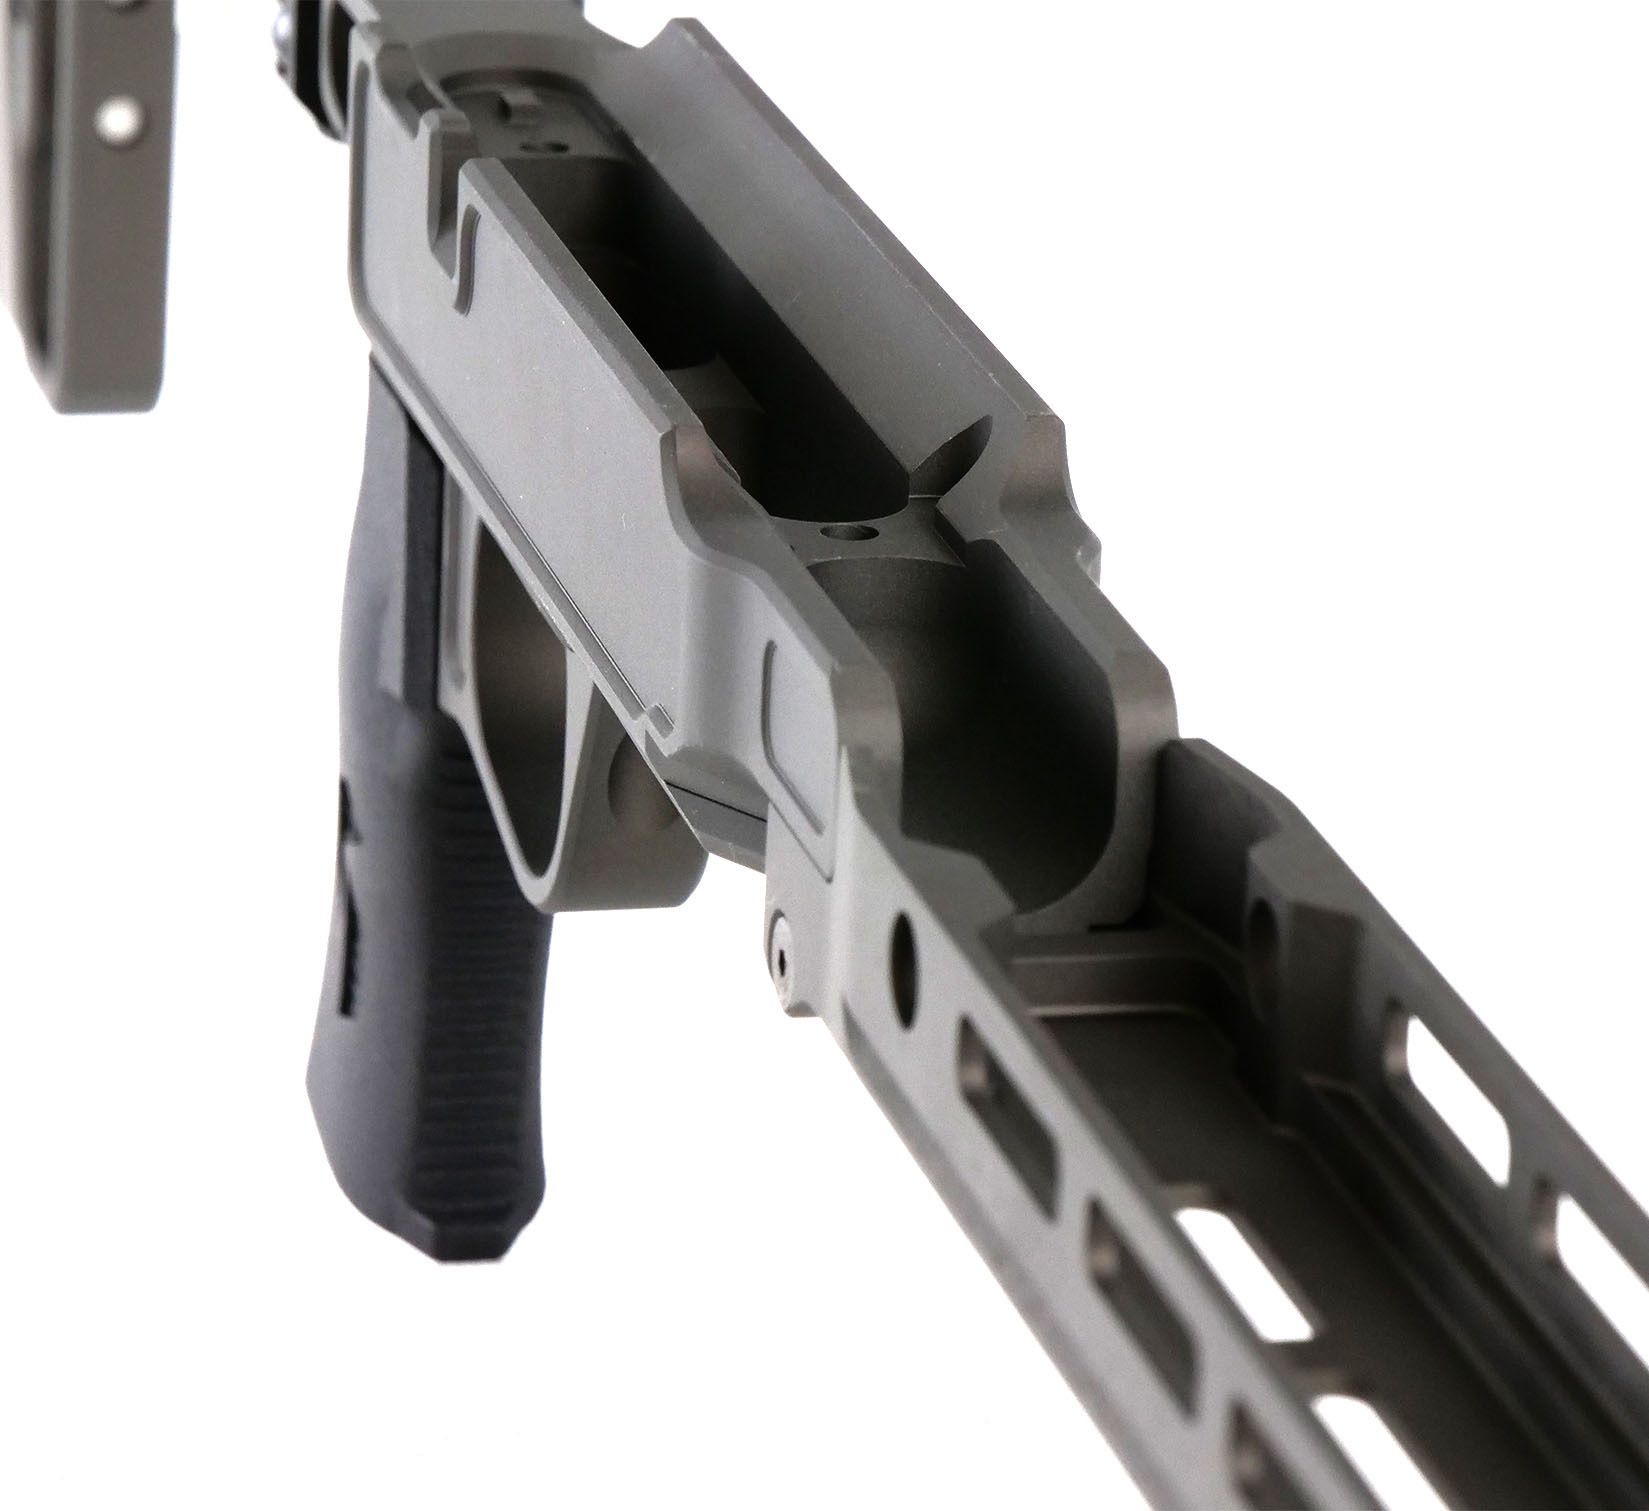 Foundation T1X Chassis w/ Folding Stock/Forend/Grip